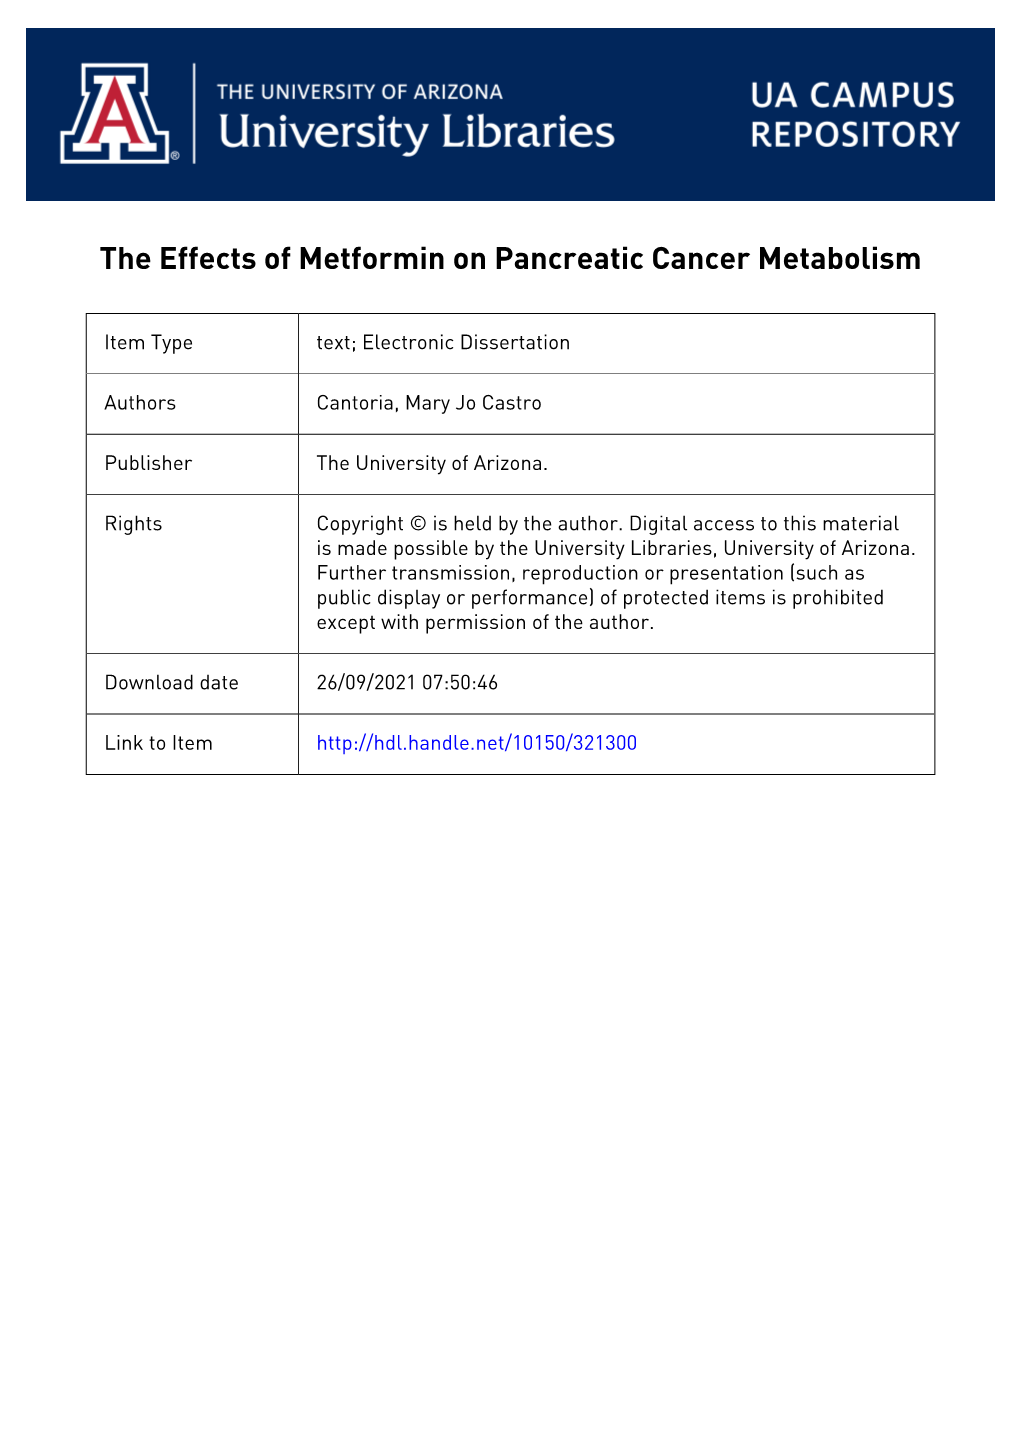 The Effects of Metformin on Pancreatic Cancer Metabolism